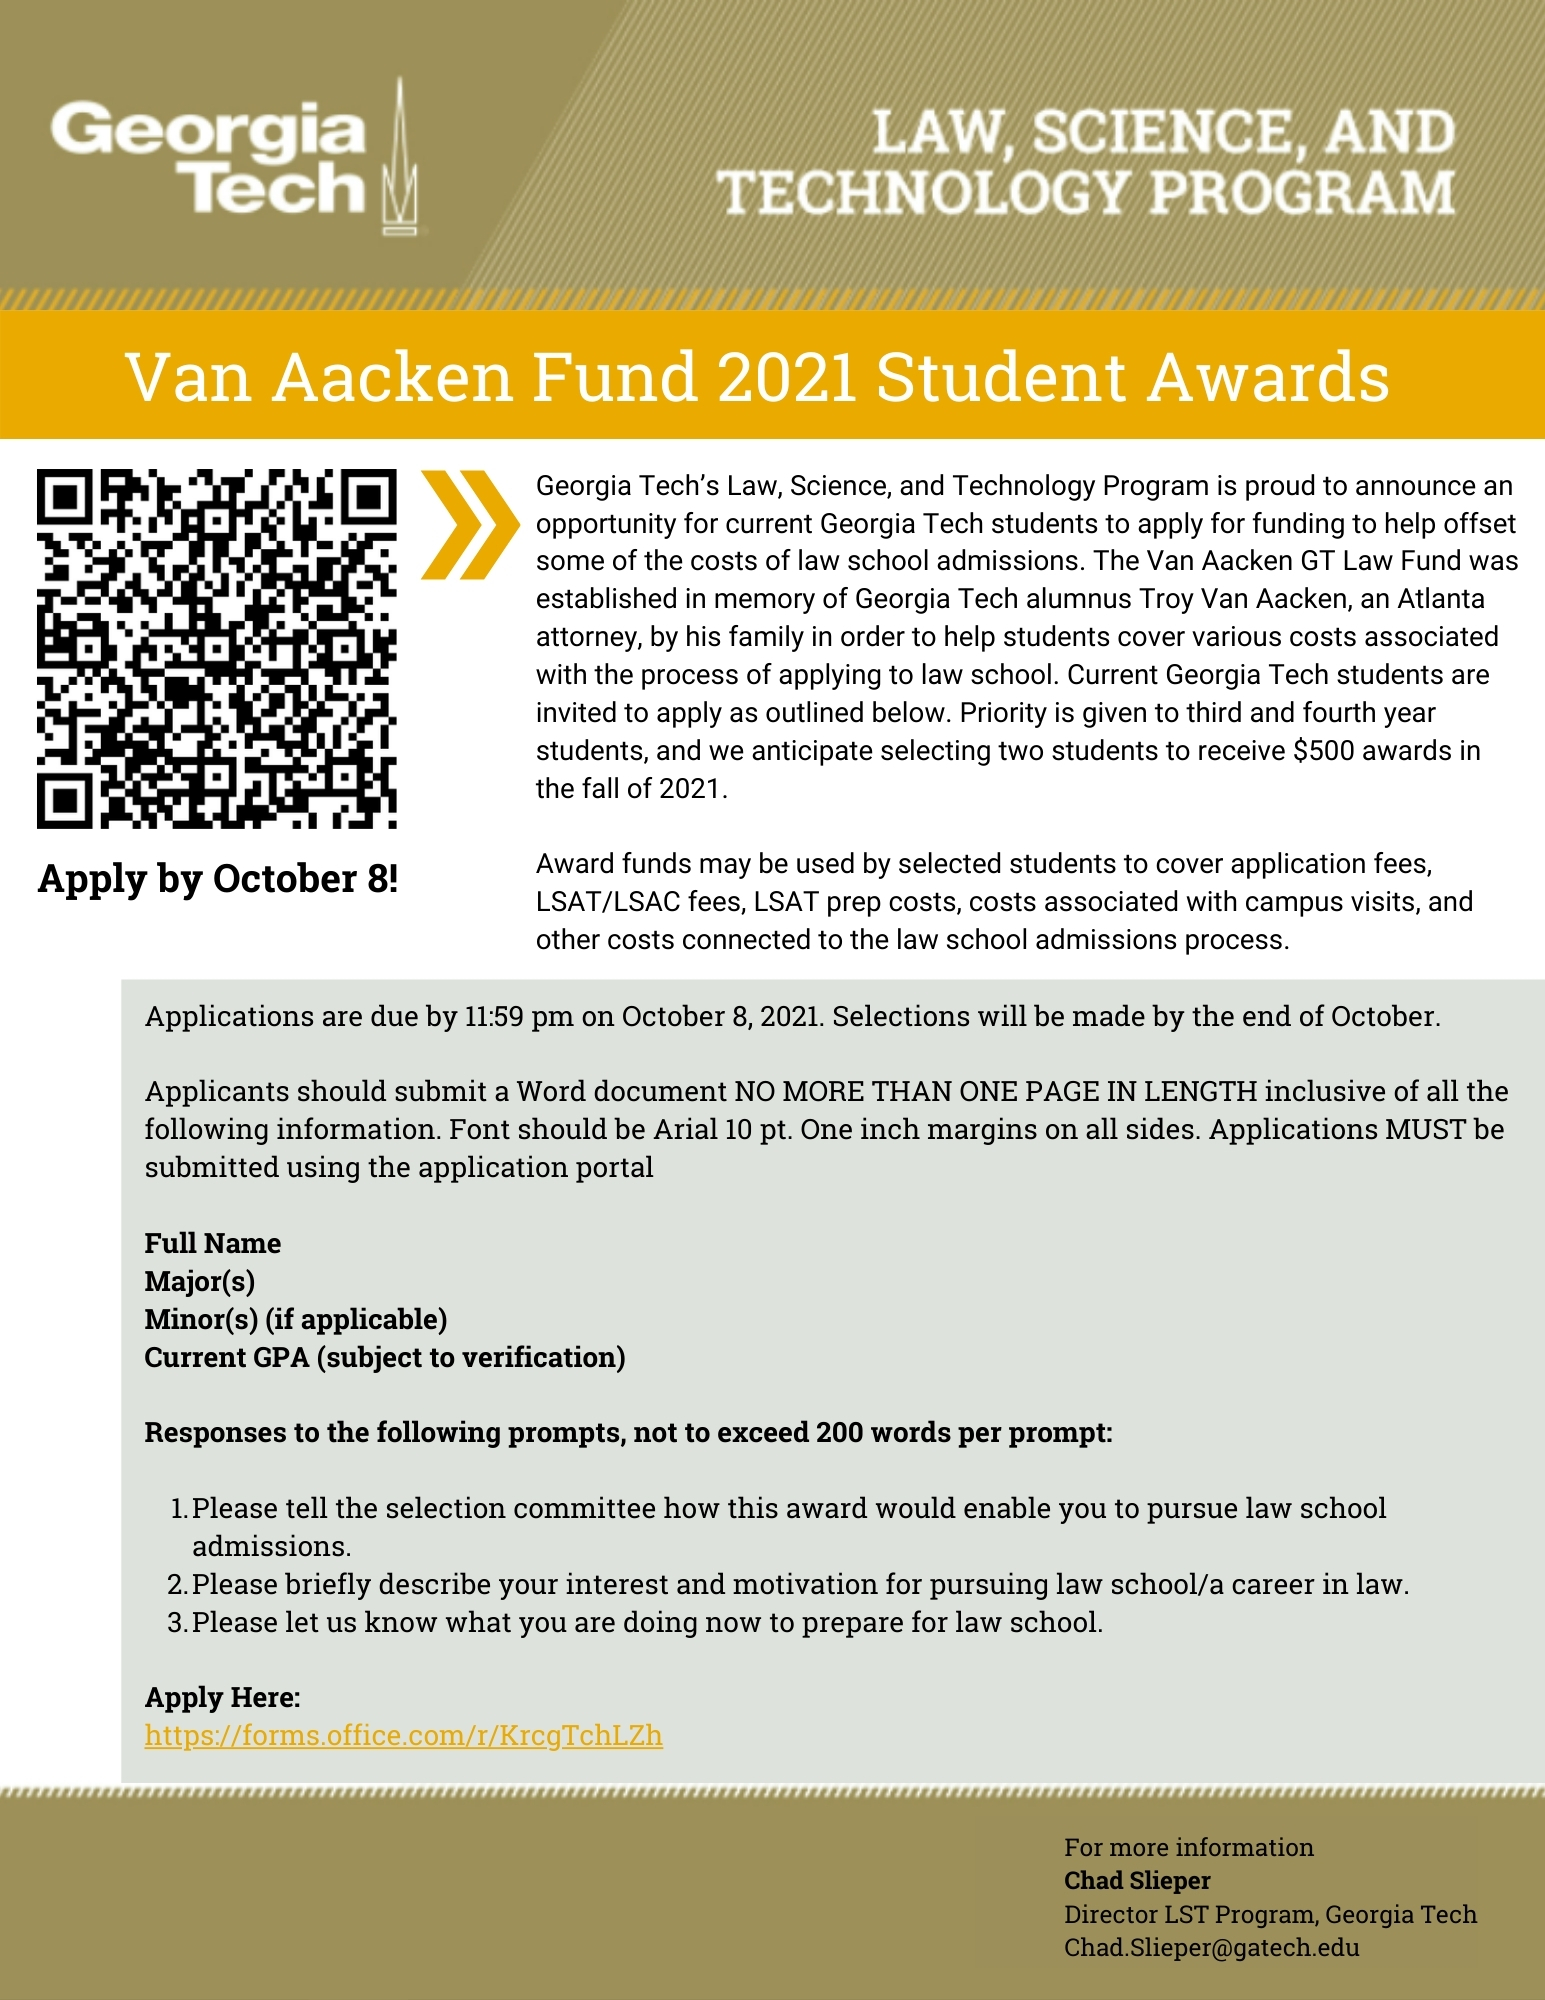 A flyer for the Van Aacken Fund Student Awards 2021